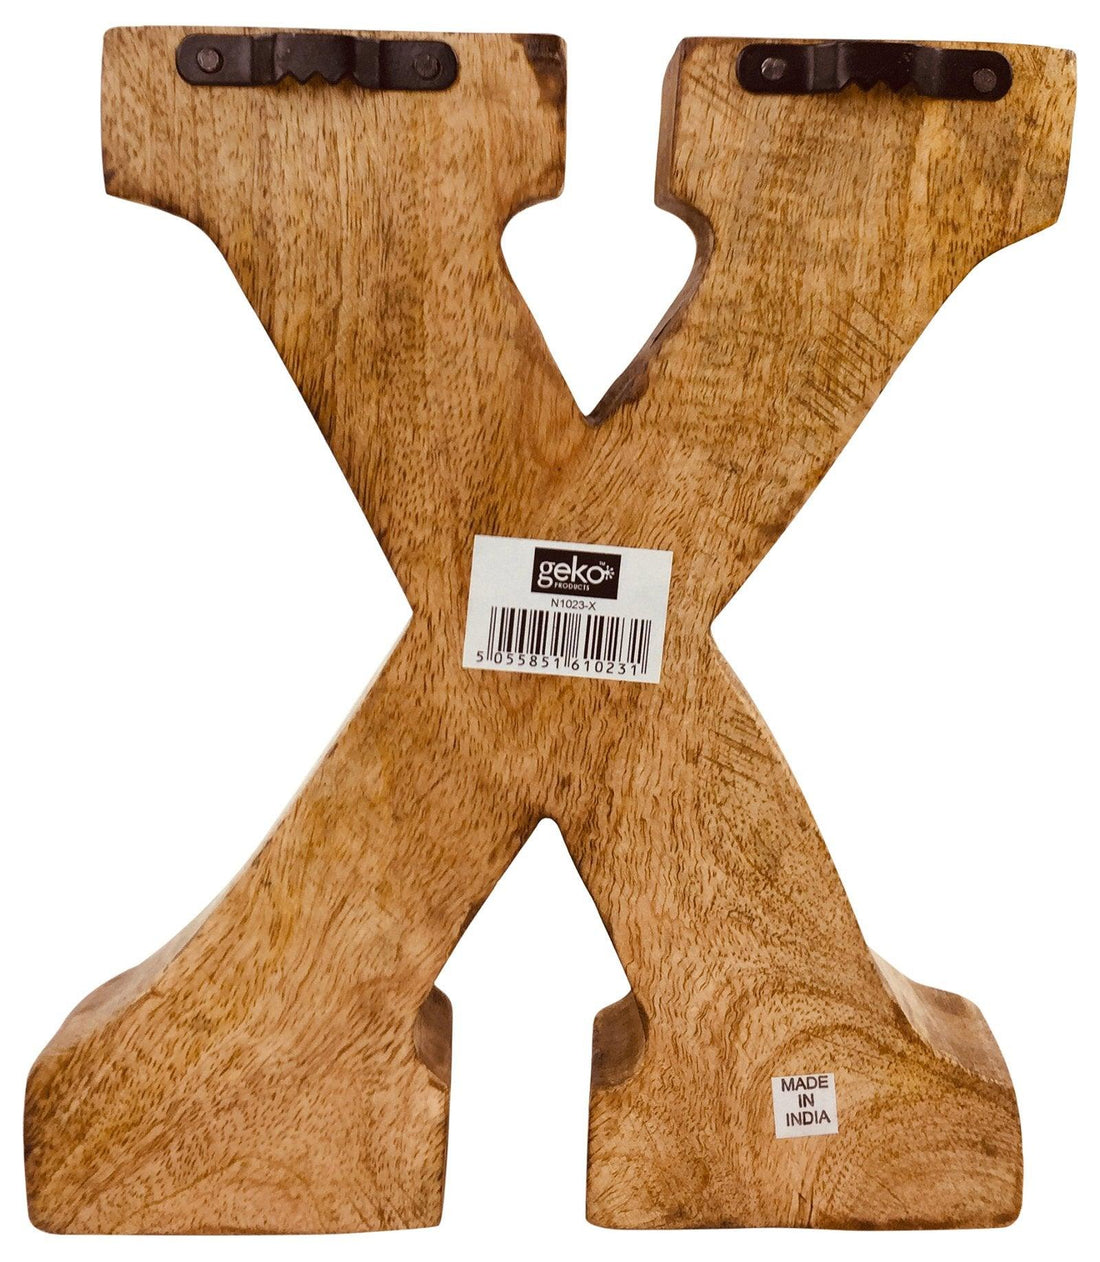 Hand Carved Wooden Geometric Letter X - £12.99 - Single Letters 